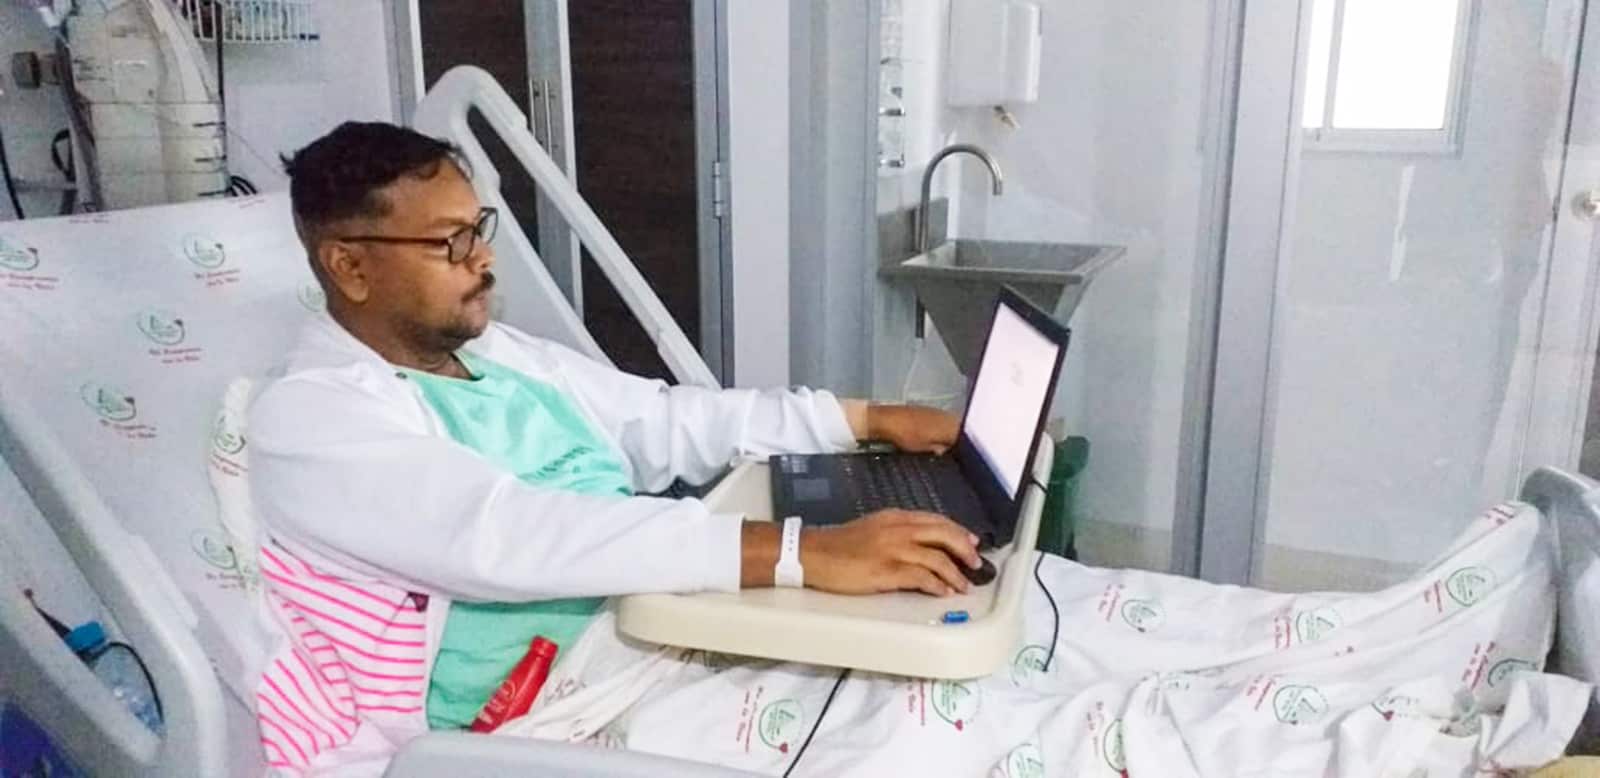 Pastor Roberto Narvaez working from his hospital bed